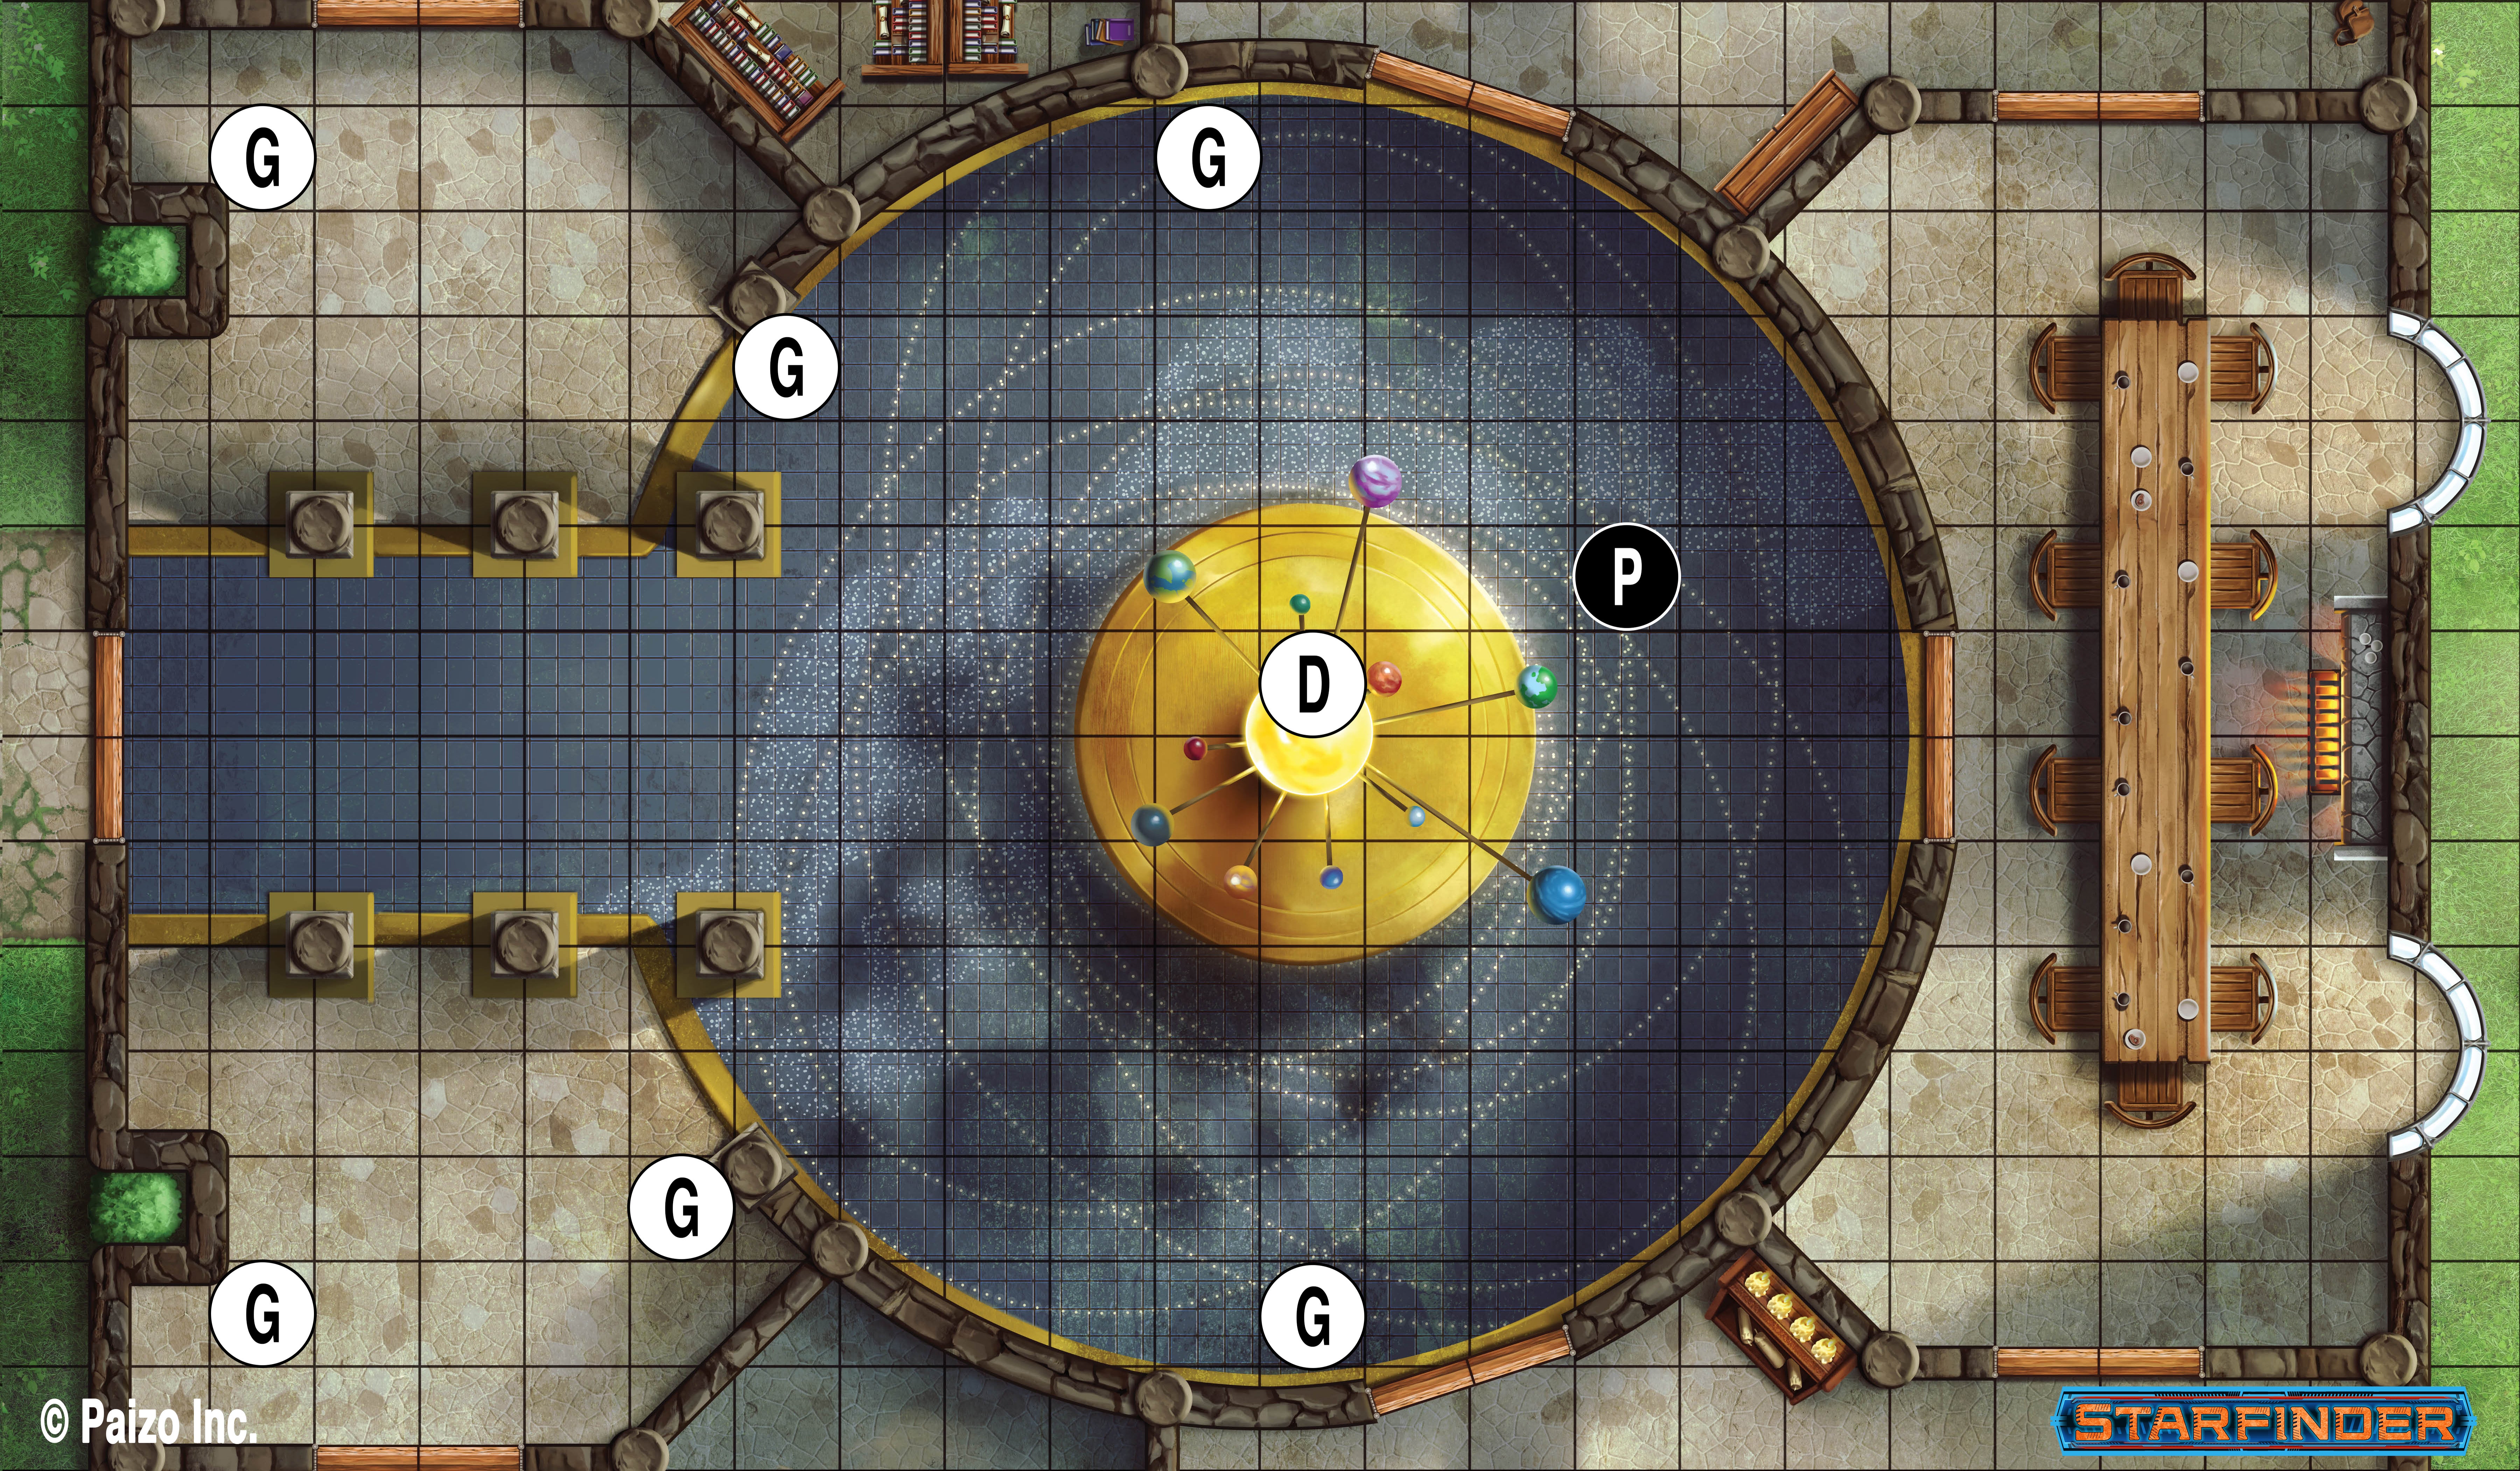 An labeled flip tile map of large room with an orrery in the center and a long table towards the back